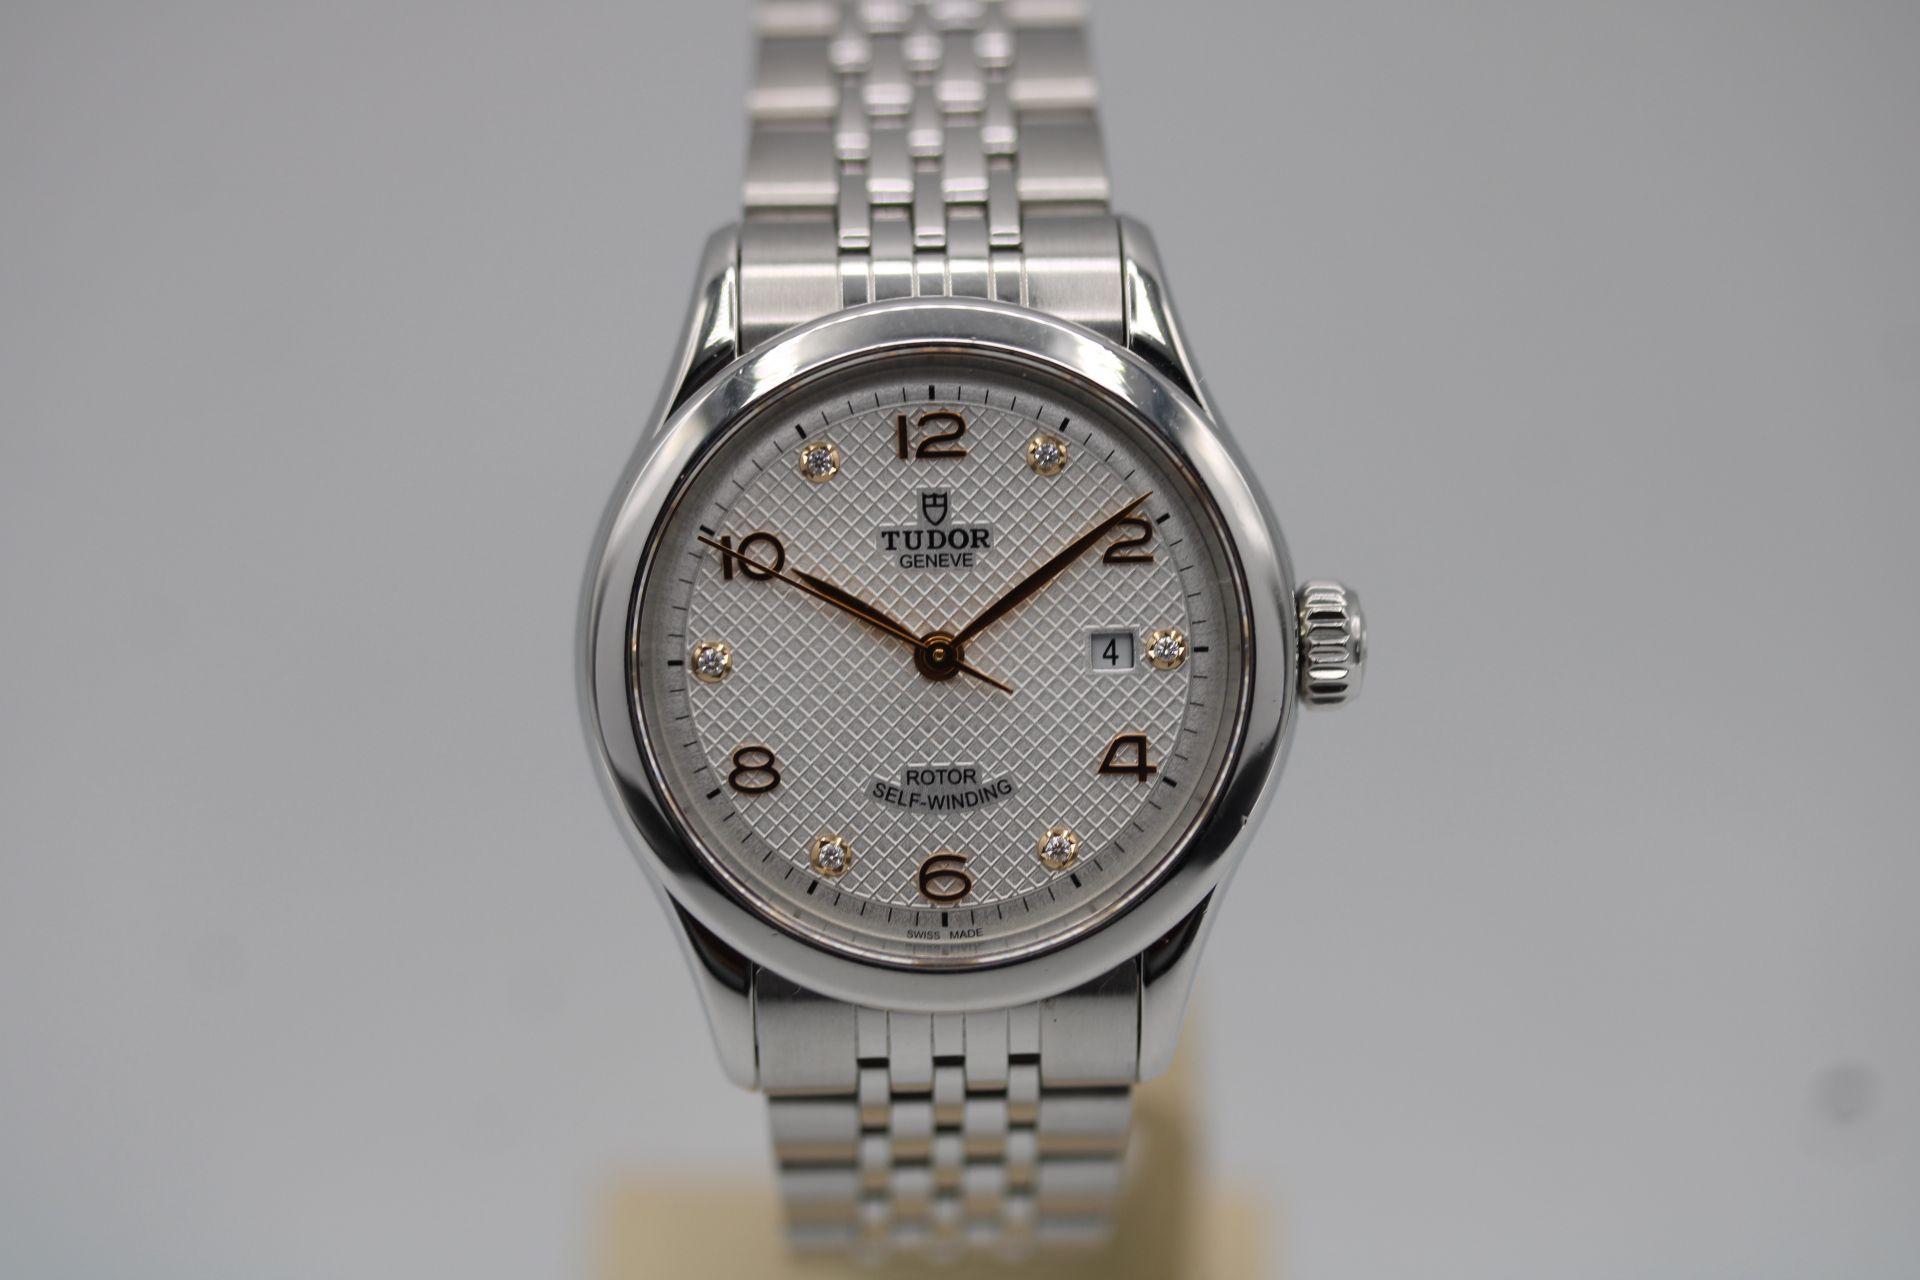 This ladies Tudor arrives as a complete full set with inner and outer boxes, both manuals and warranty card dated May 2019 in addition to our 12-month warranty.

This ladies Tudor 1926, model 91350, features a 28mm stainless steel case, white